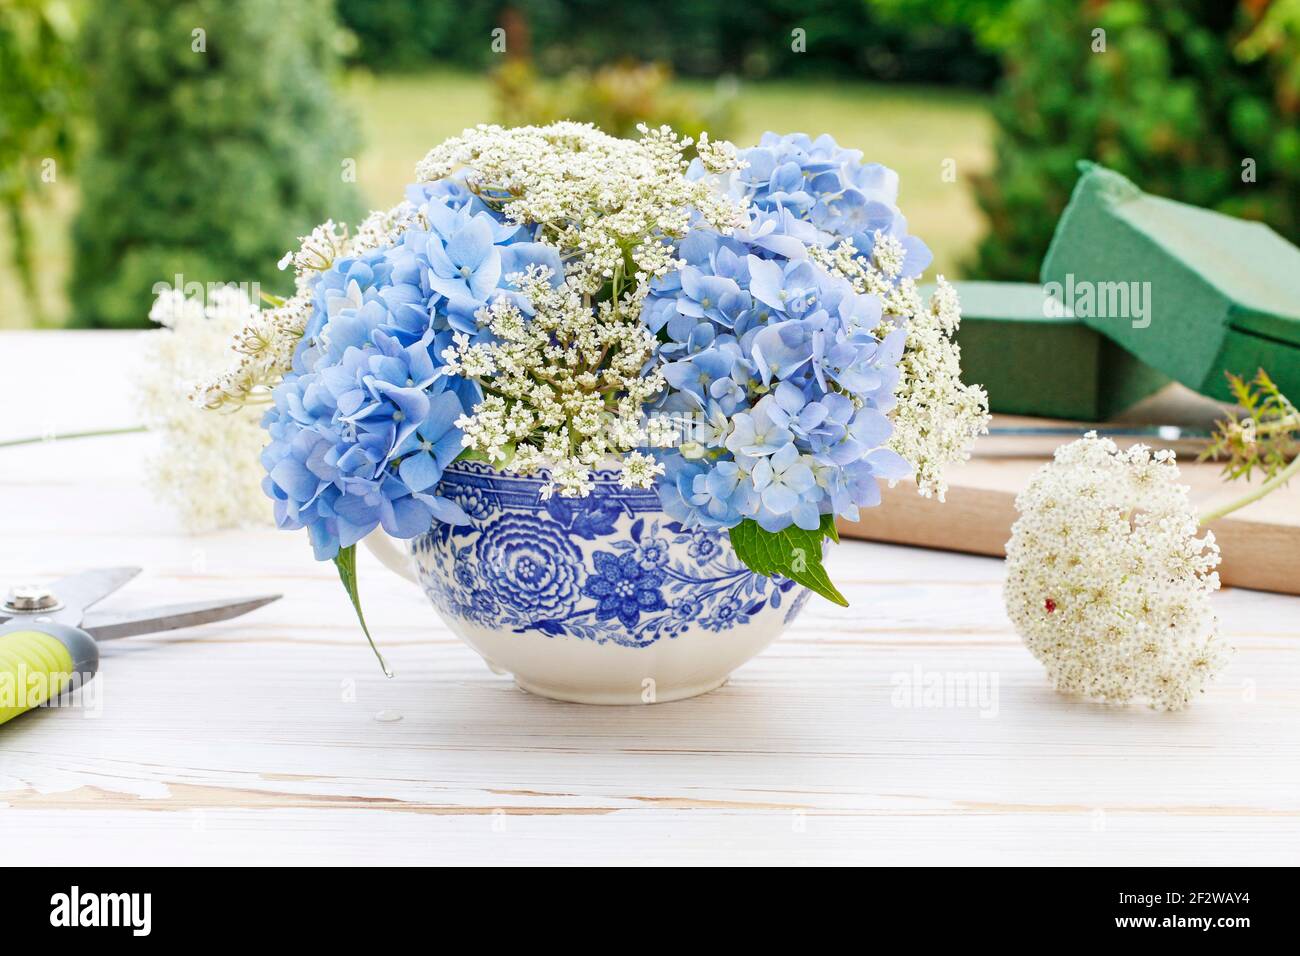 Florist at wotk: How to make floral arrangement with blue hortensia (hydrangea) and white Queen Anne's lace (daucus carota) flowers on white wooden ta Stock Photo